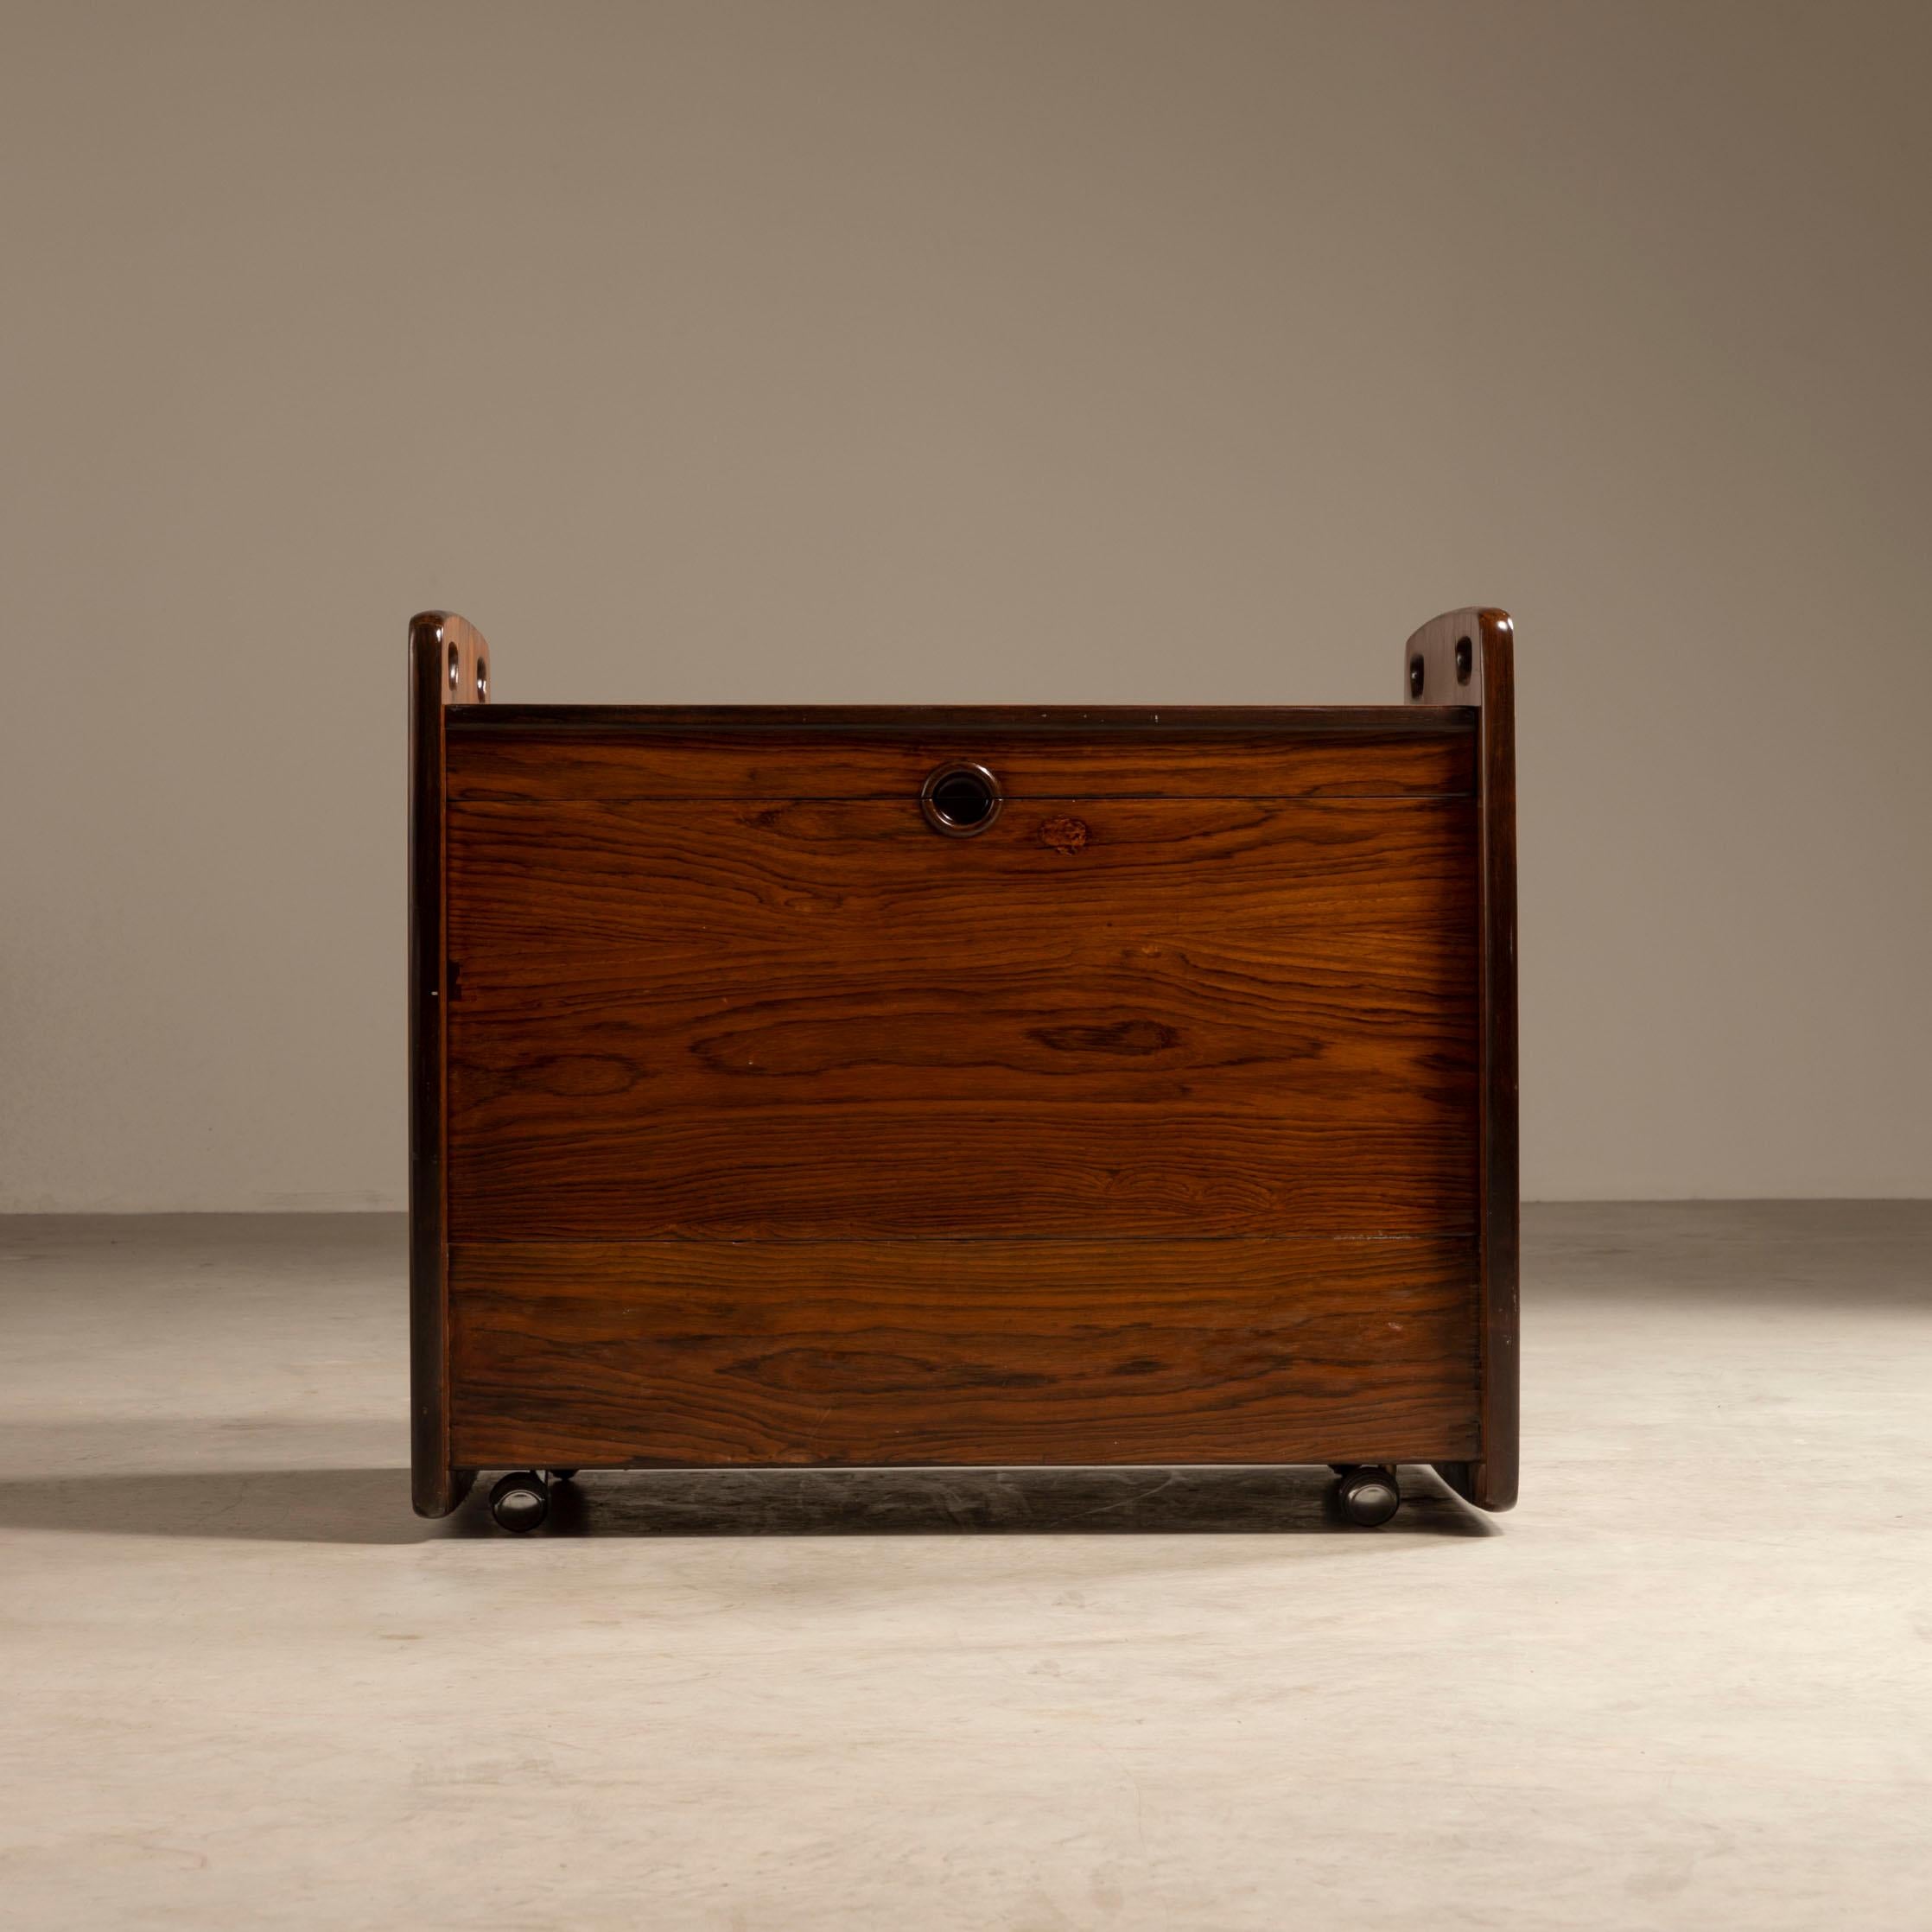 This stunning cart/trolley designed by the legendary Brazilian architect and designer Sérgio Rodrigues in the 1960s is a true masterpiece. Made of Brazilian hardwood, this piece features a white Formica interior that offers a sleek and modern